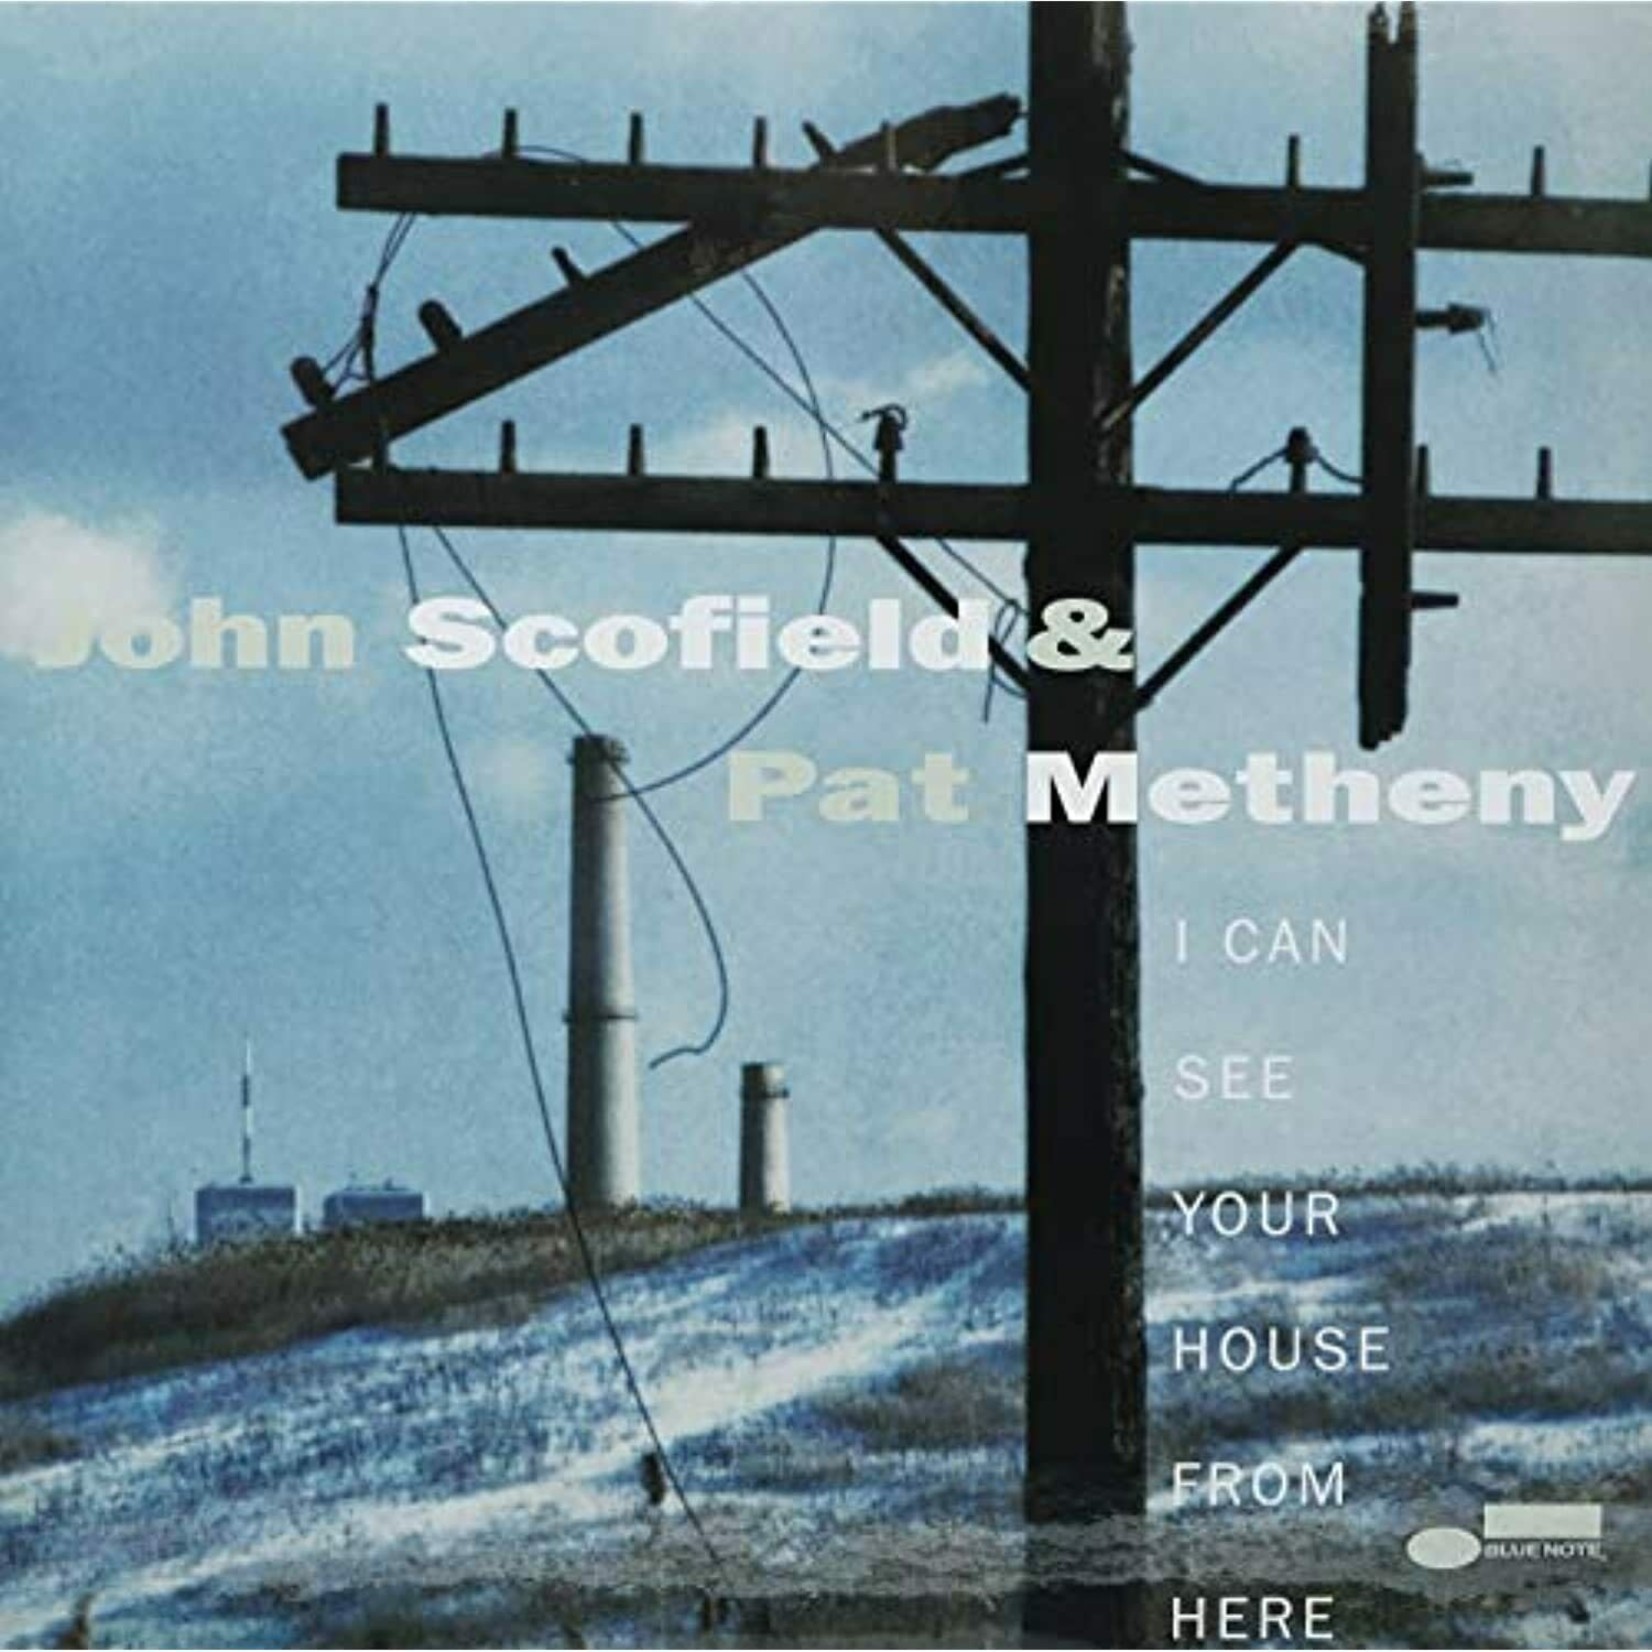 John Scofield & Pat Metheny - I Can See Your House From Here (2LP, 180g)